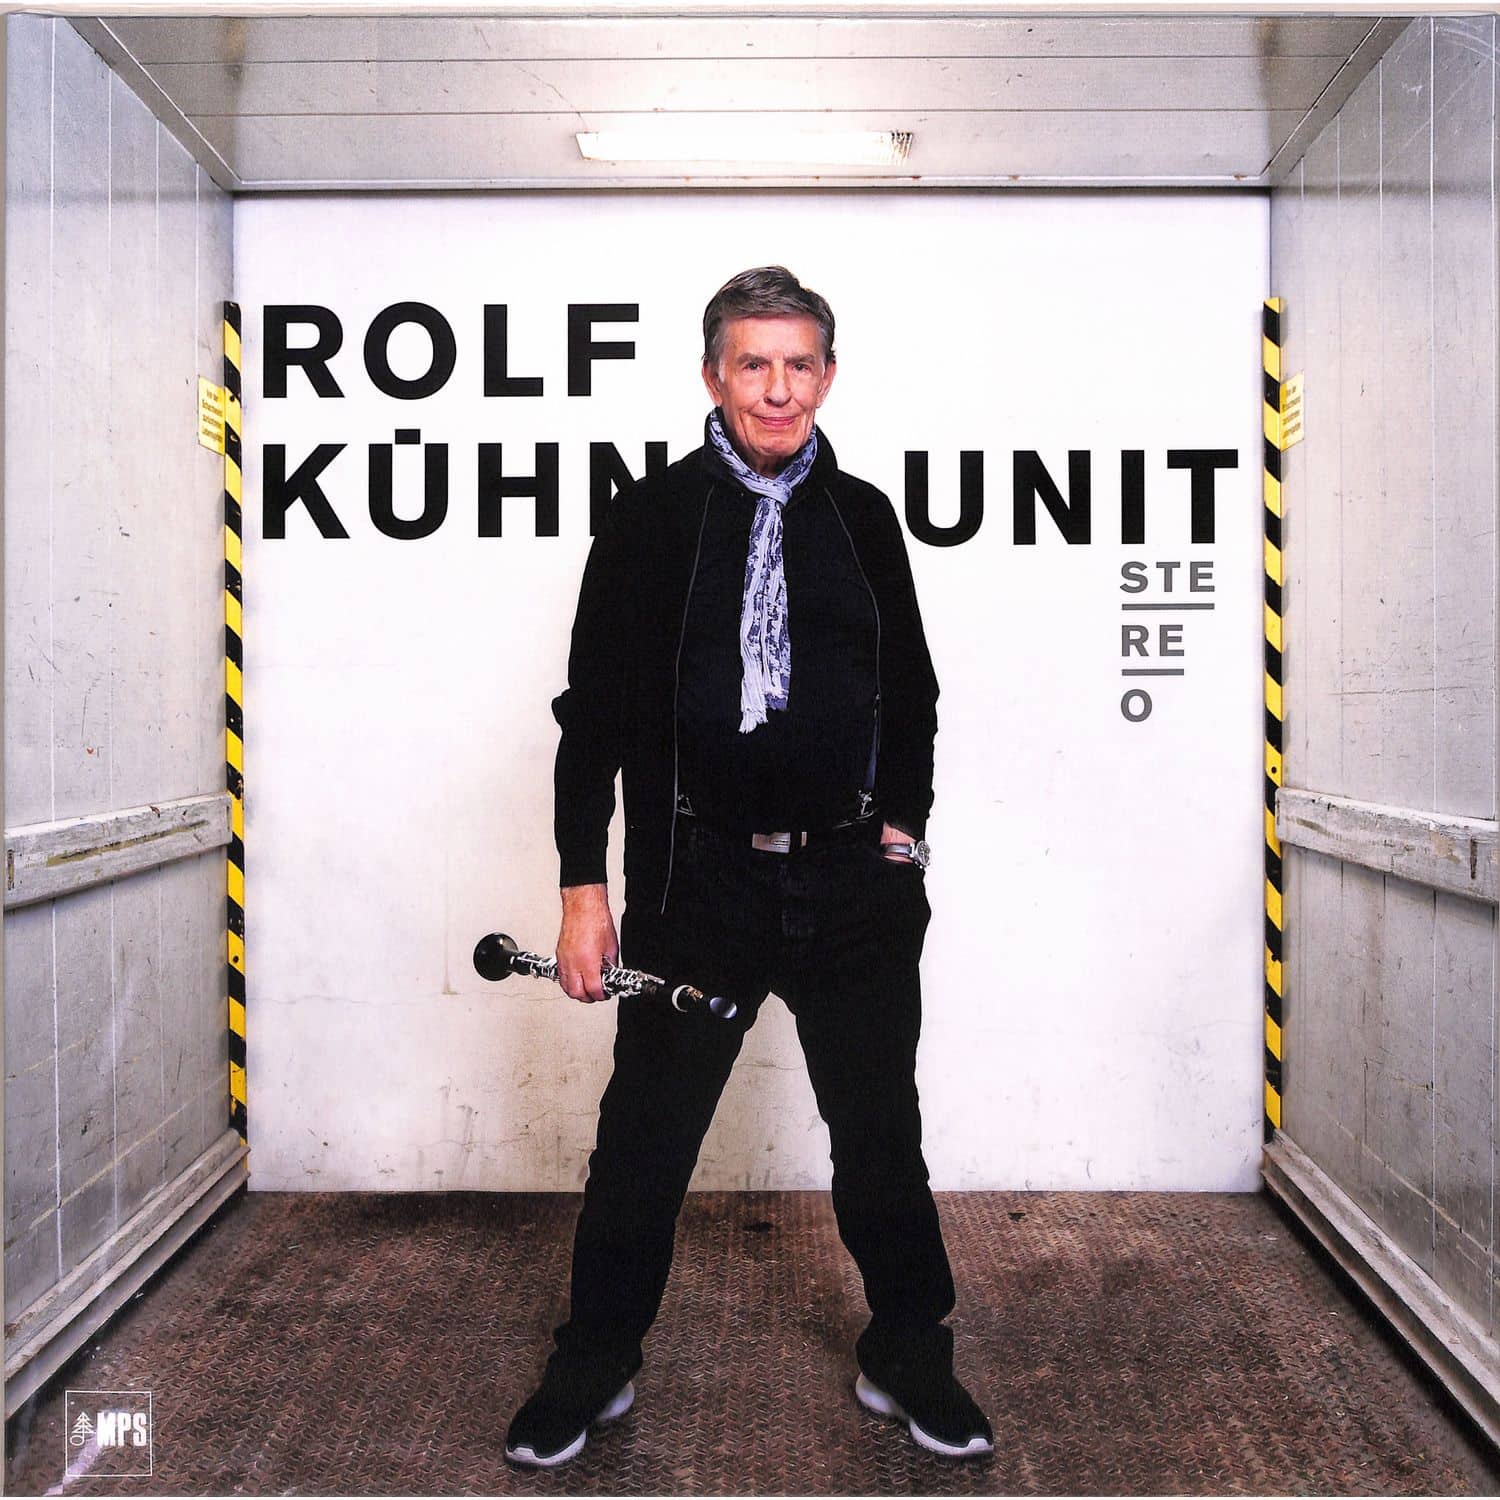 Rolf Khn Unit - STEREO 